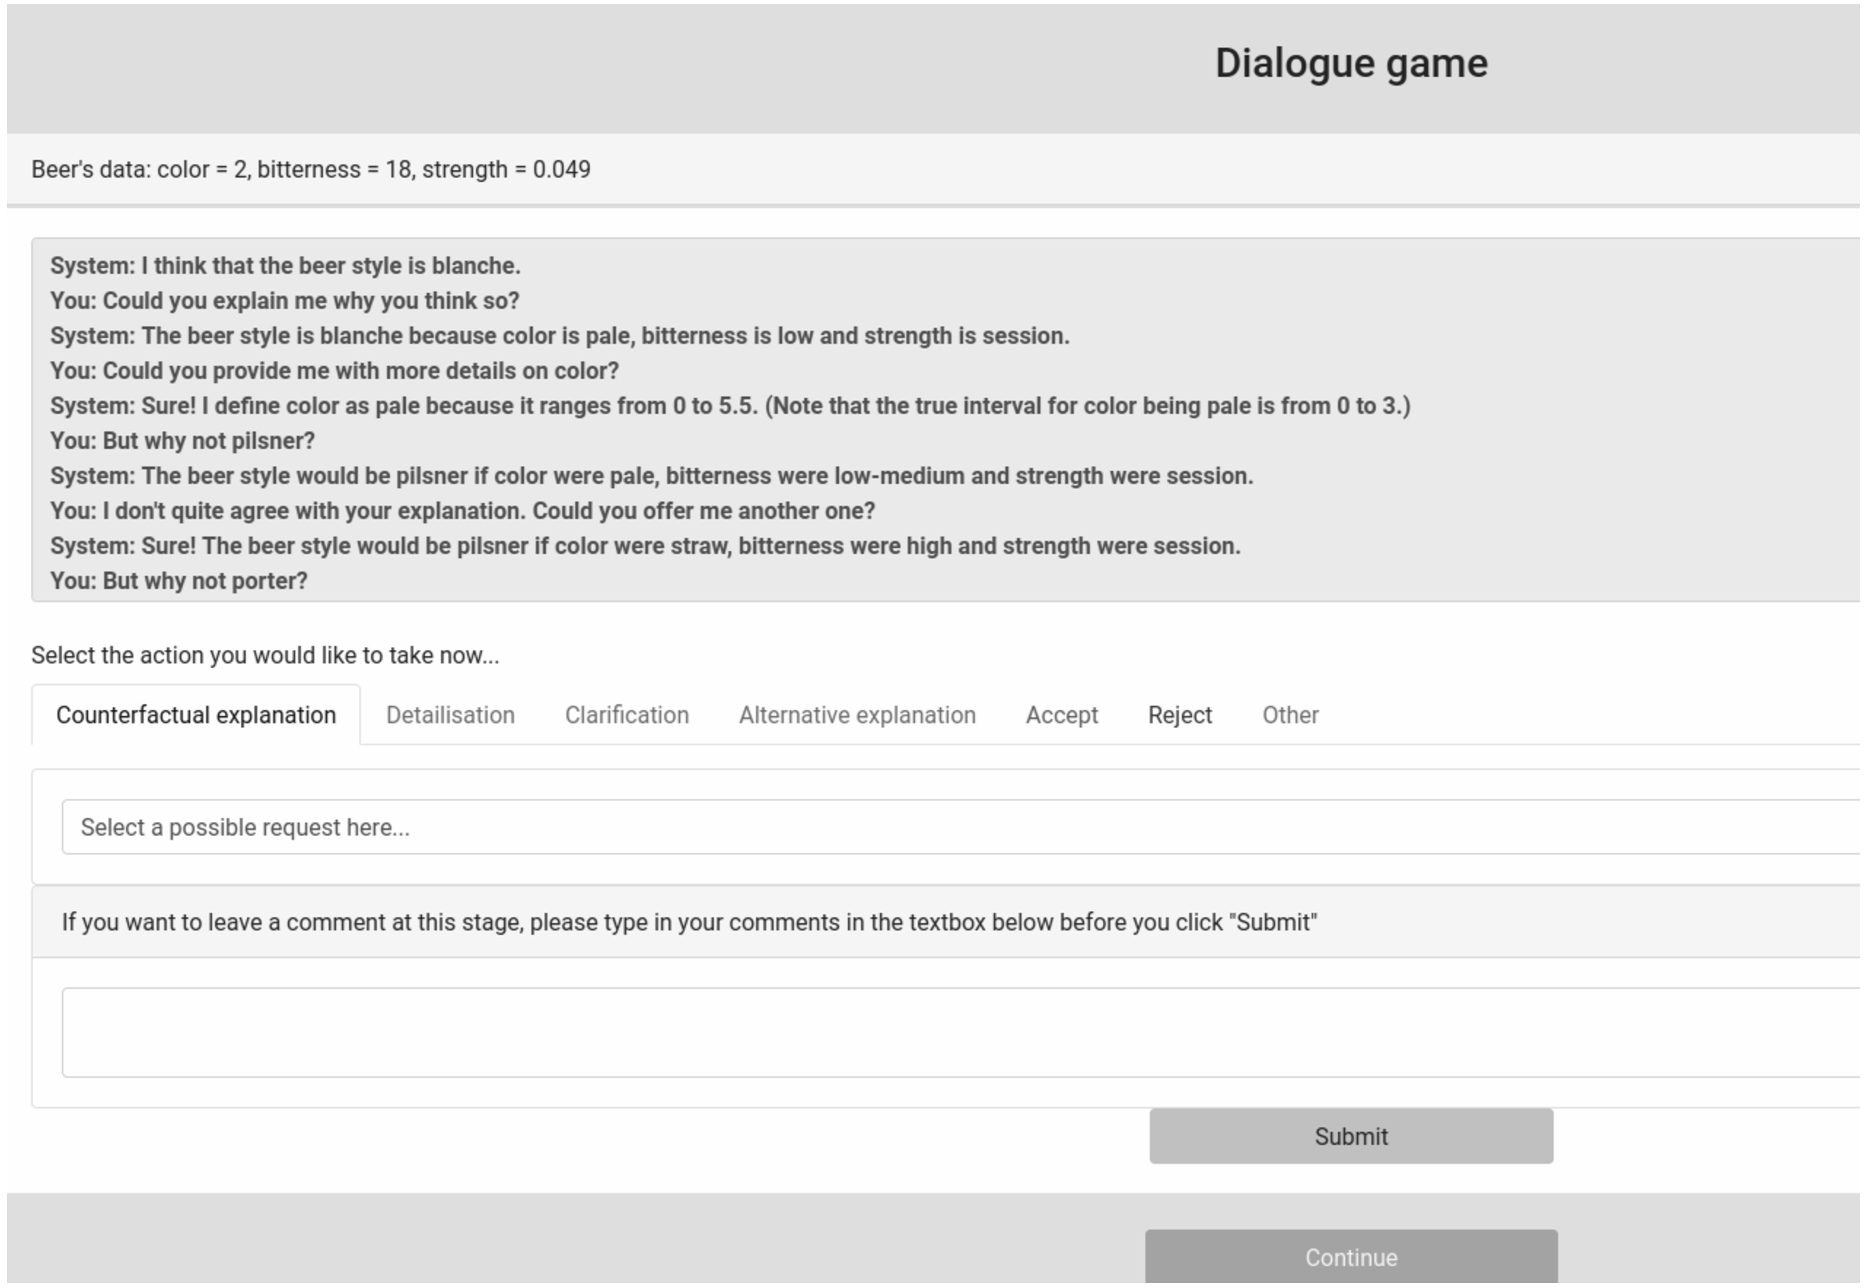 An example of a dialogue game human evaluation survey (the beer style dataset scenario).